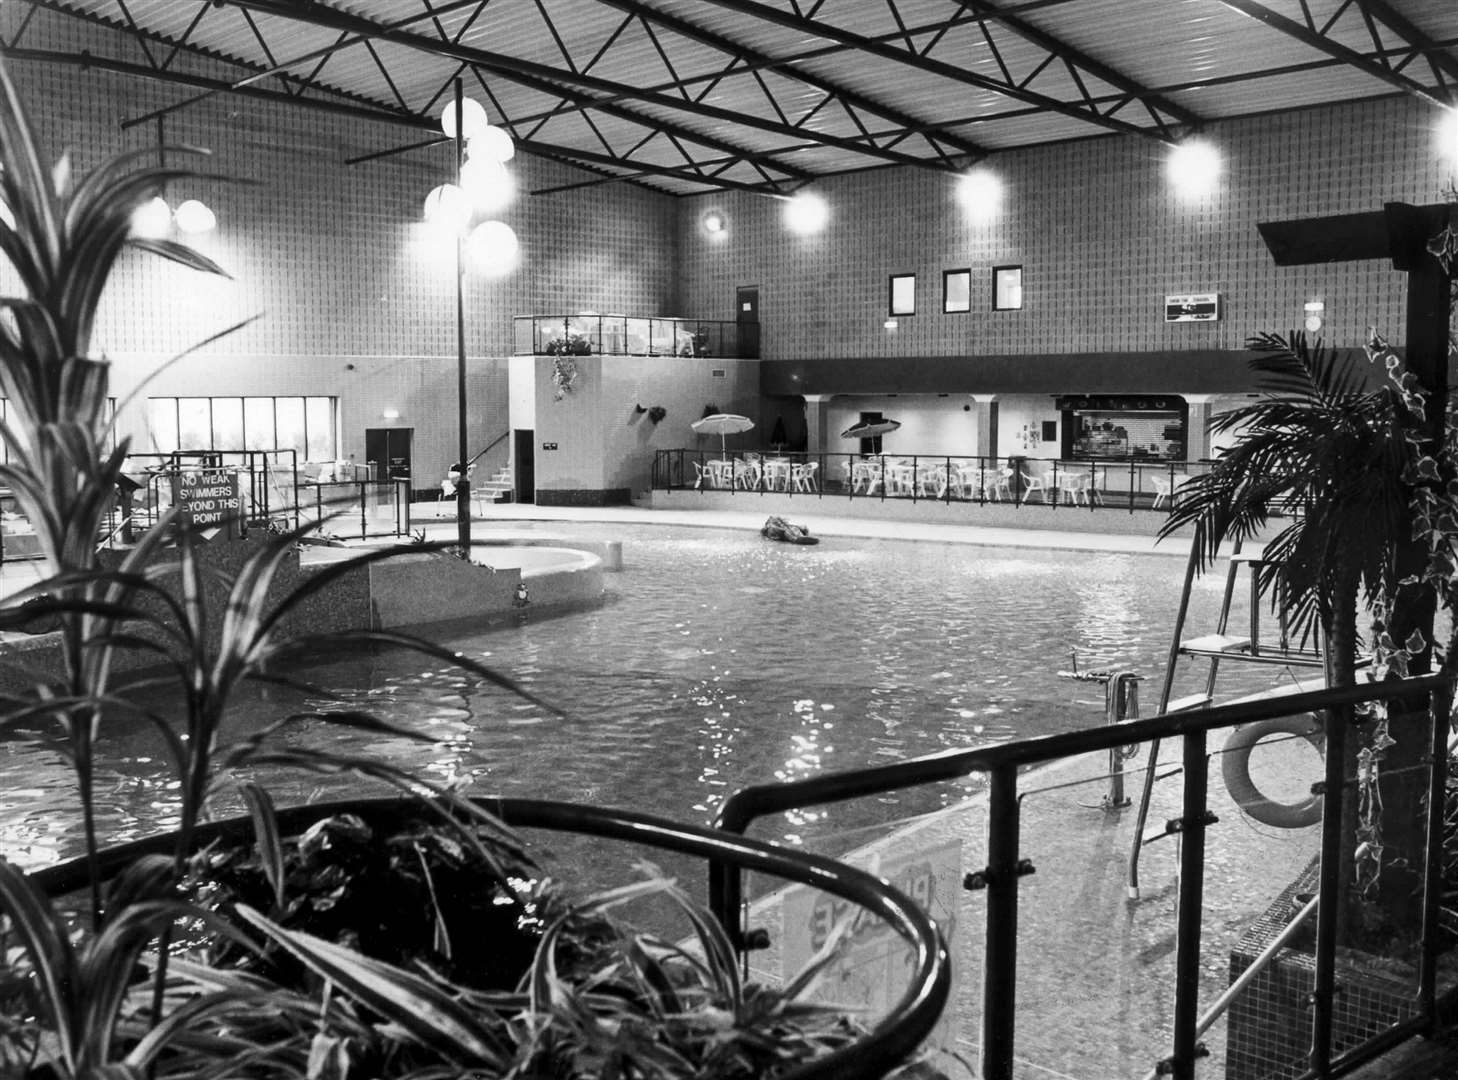 The swimming pool in 1990